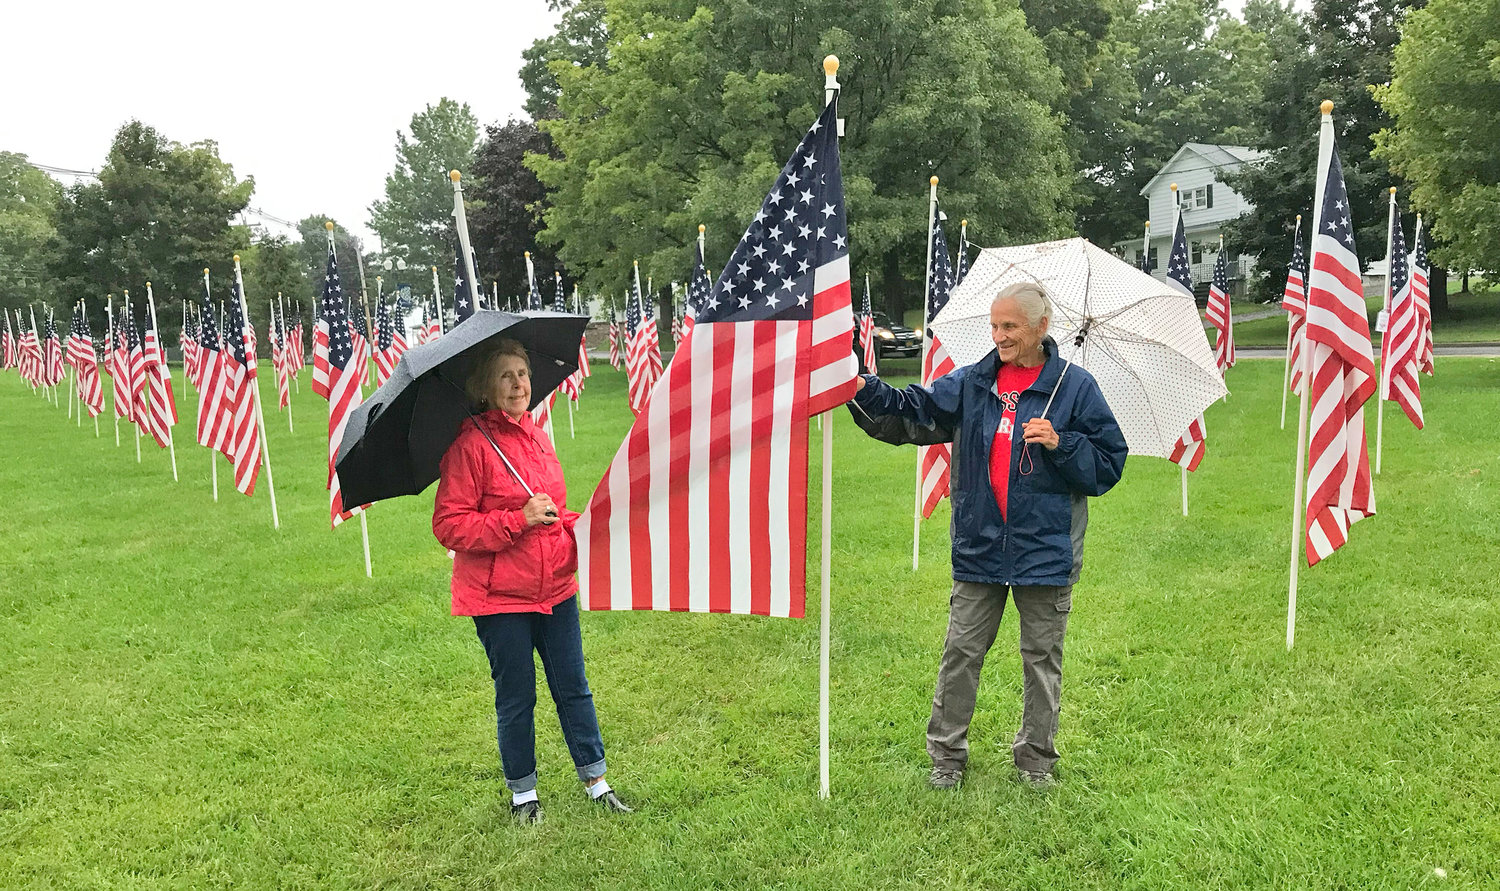 Rose Hatch, left, and Suzanne Adams-LaLonde walk through the American flags Sunday during the 9/11 Remembrance Ceremony at Reilly-Mumford Park in Sherrill.